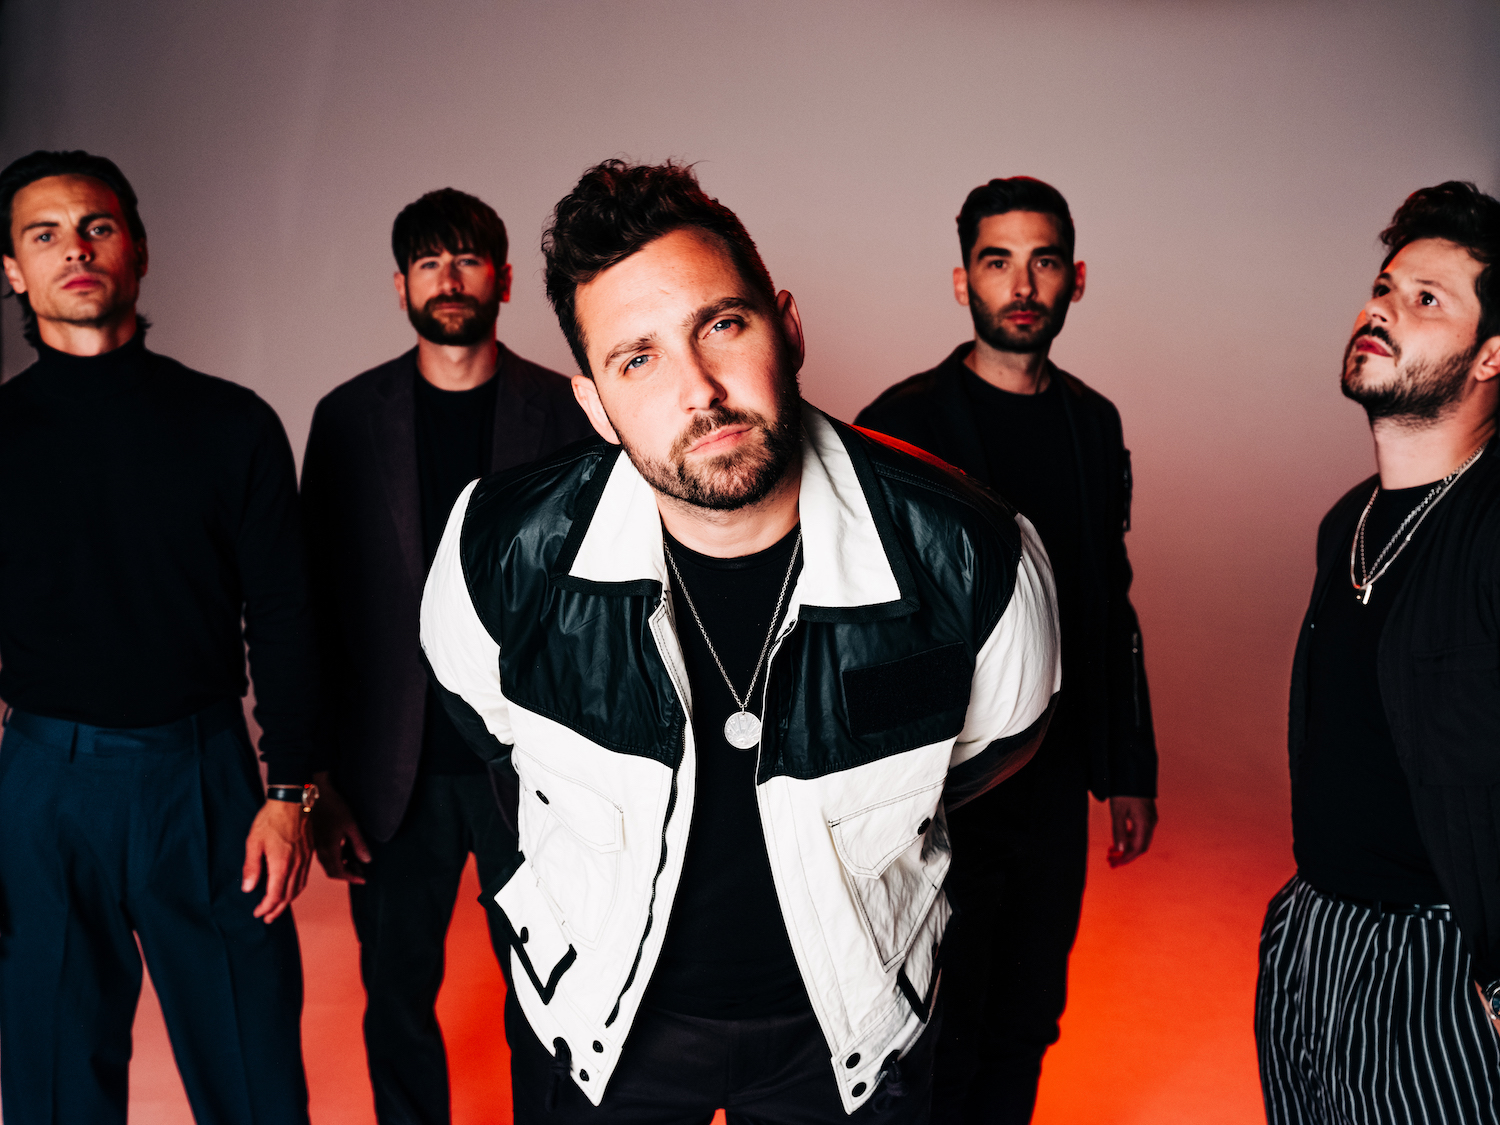 YOU ME AT SIX release new single 'SUCKAPUNCH' and announce 2021 album launch shows 